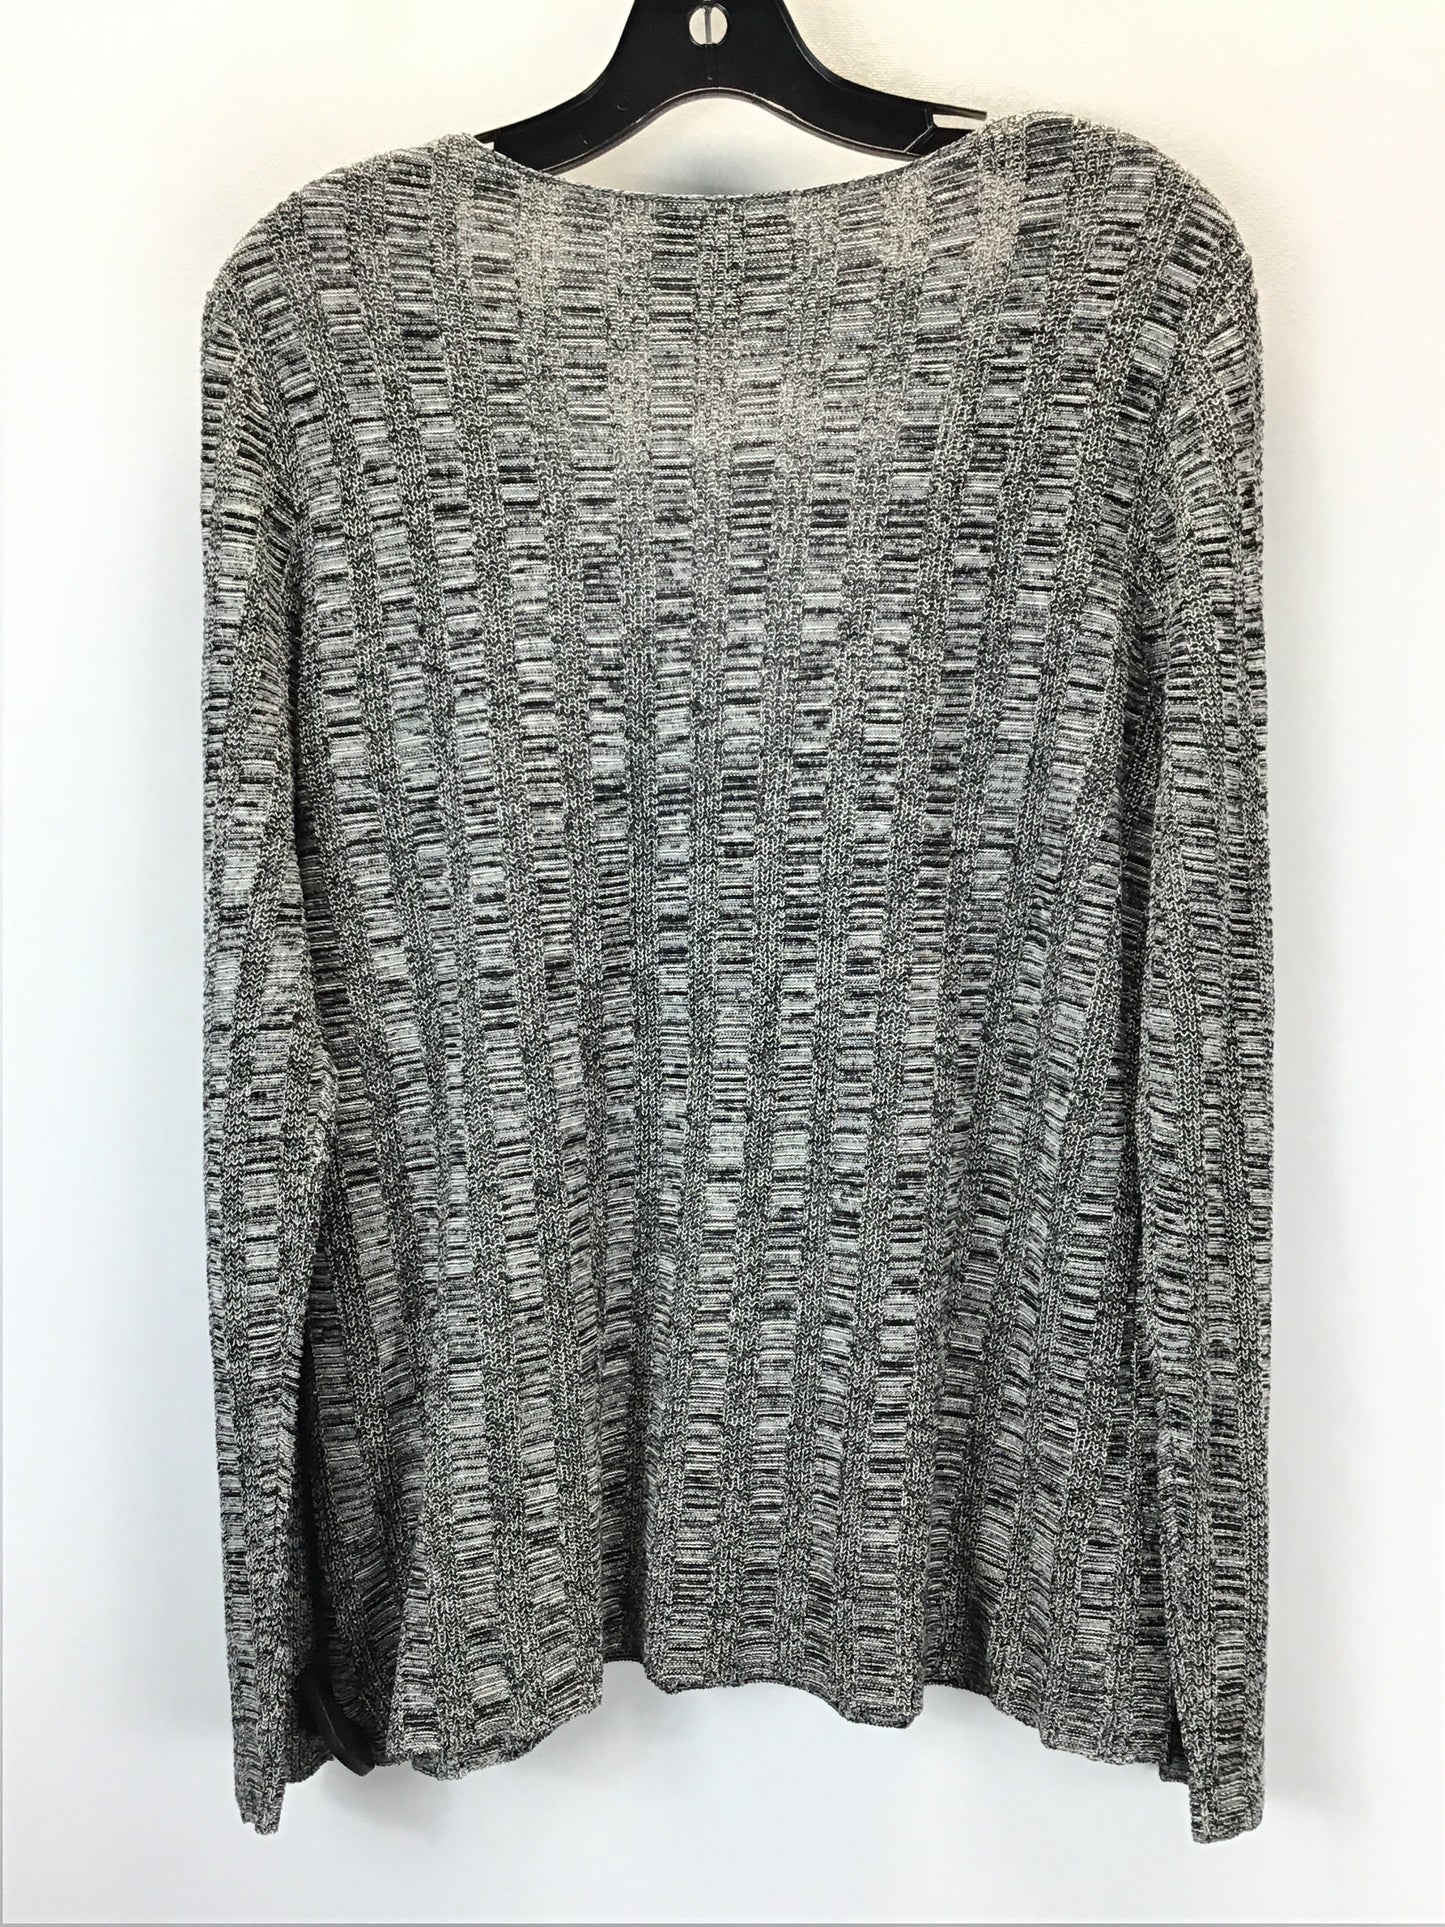 Sweater By Eileen Fisher  Size: M